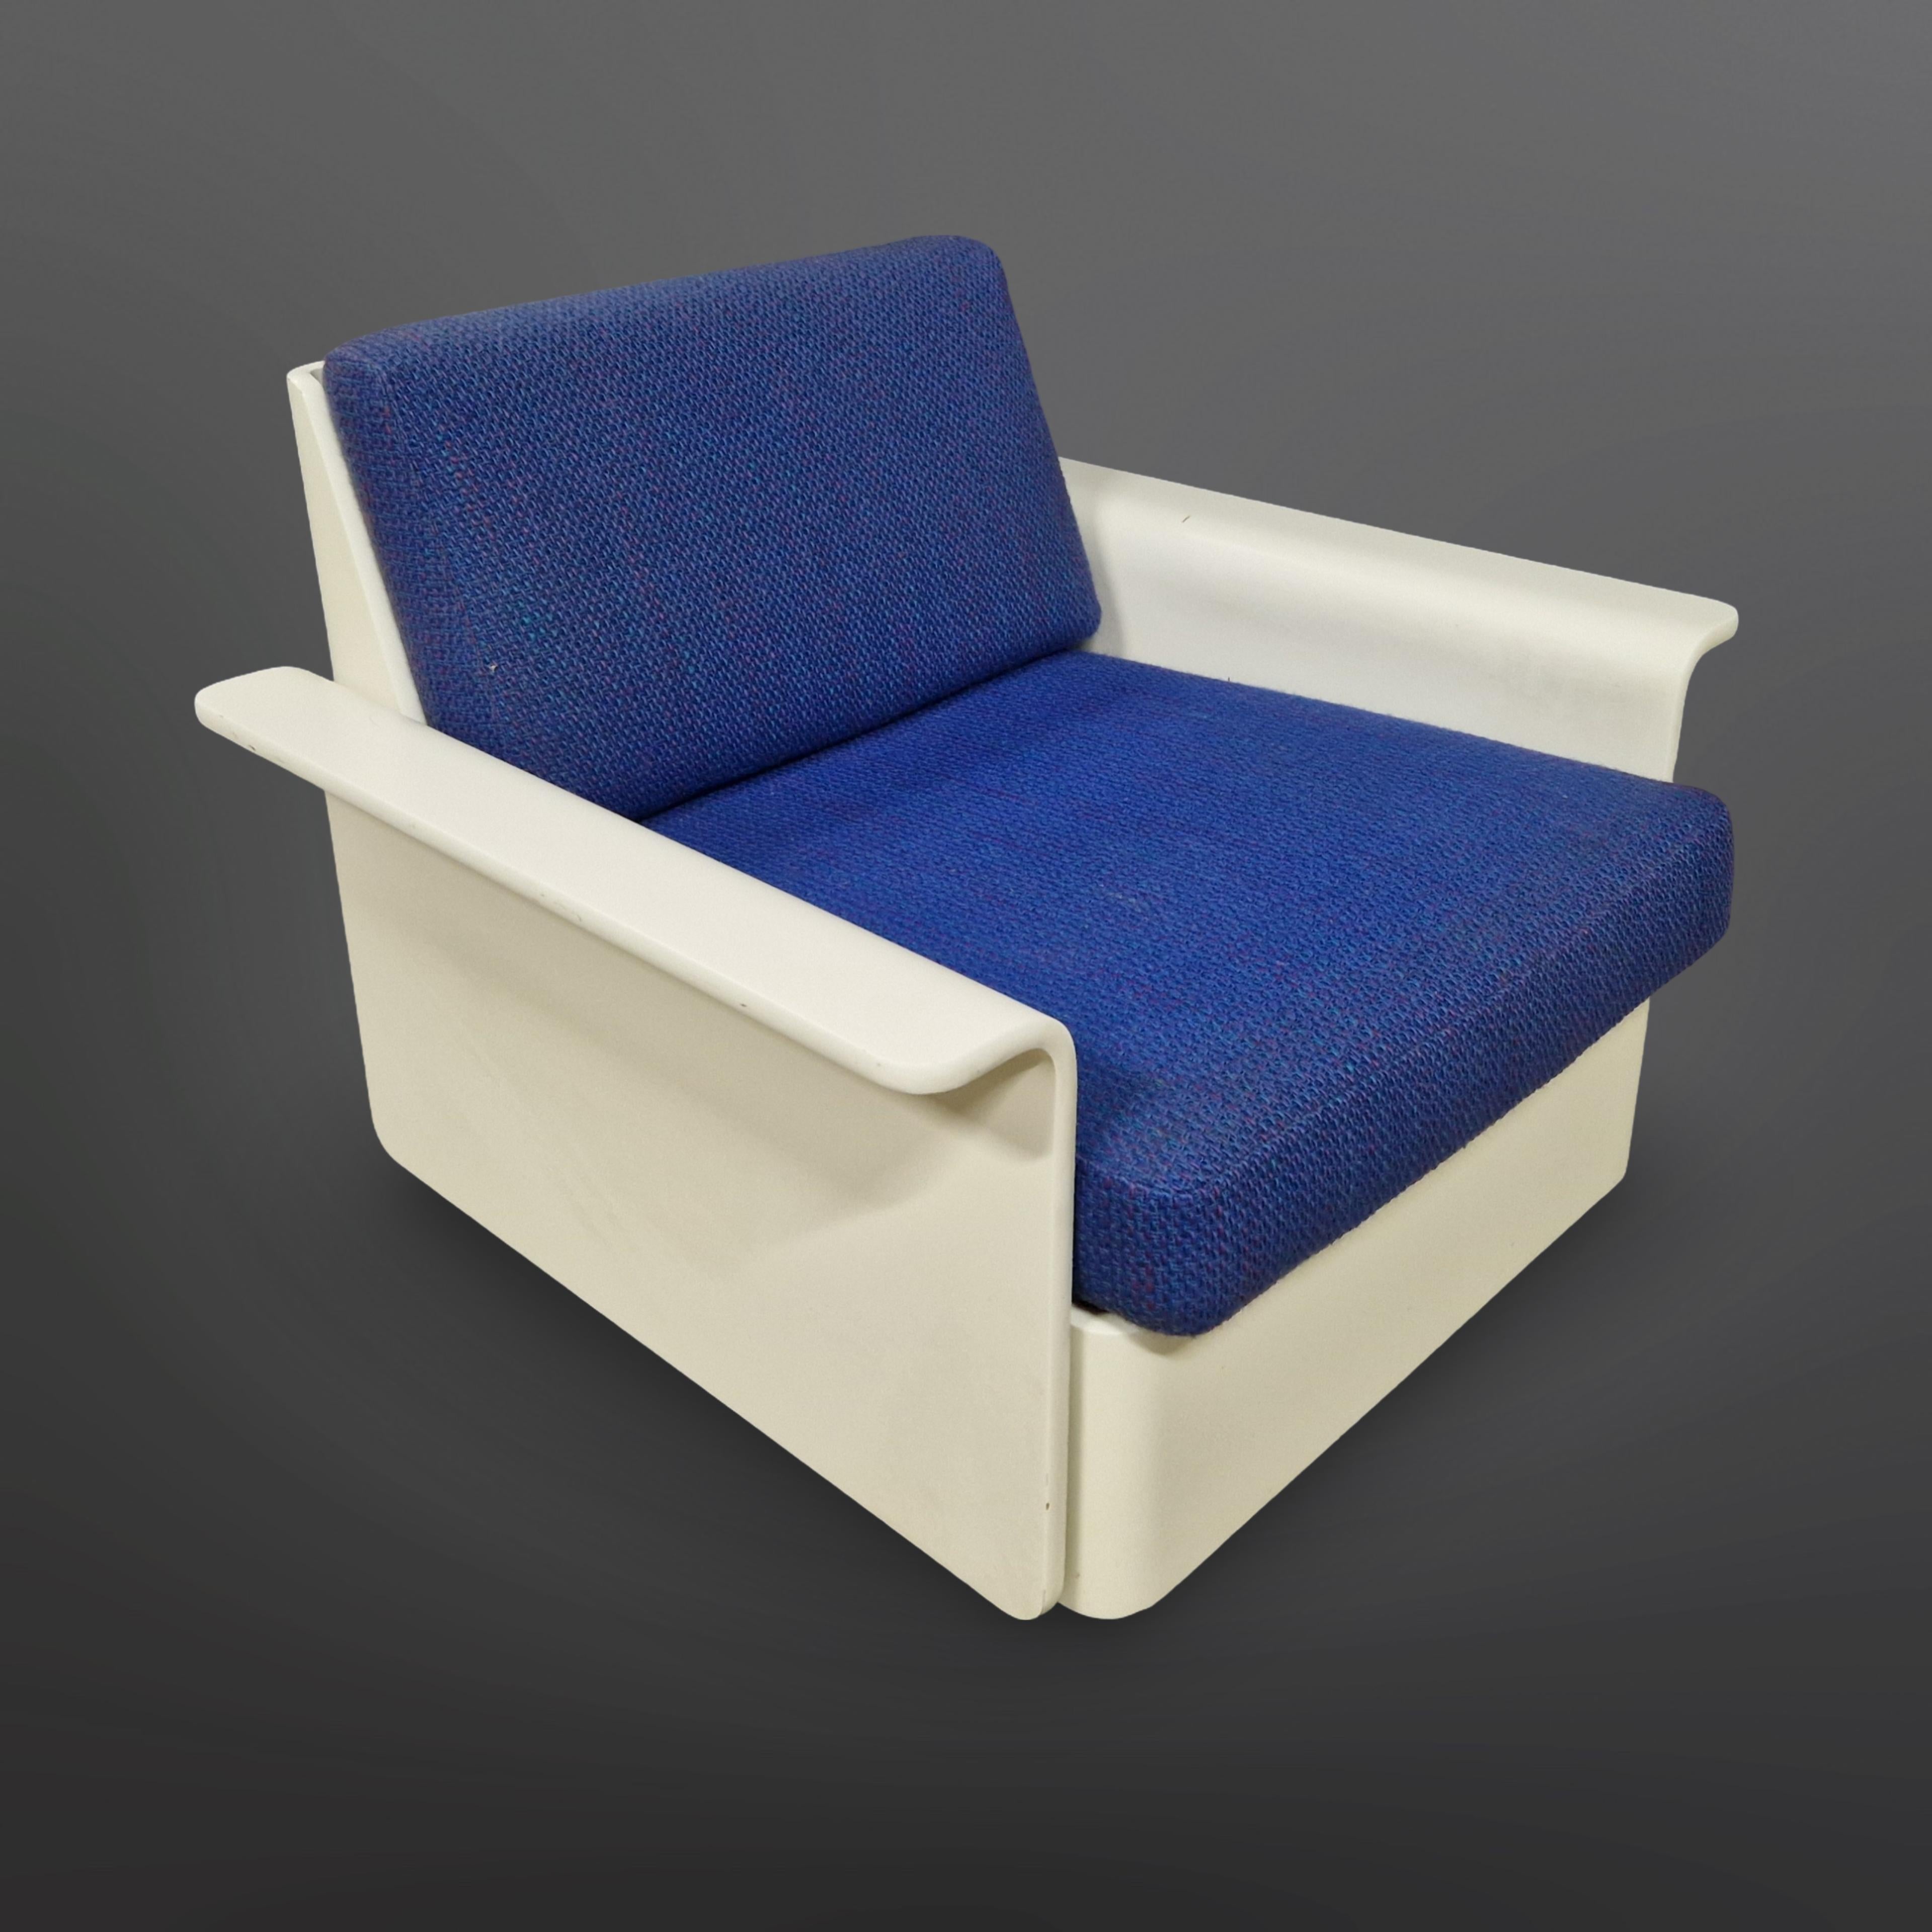 Space age lounge chair with the original blue fabric. Made and labeled by COR Germany in the 1960s. It is probably a design by Luigi Colani in the Orbis modular design range.
It is made of bent plywood. The seat is made from a metal tube frame with